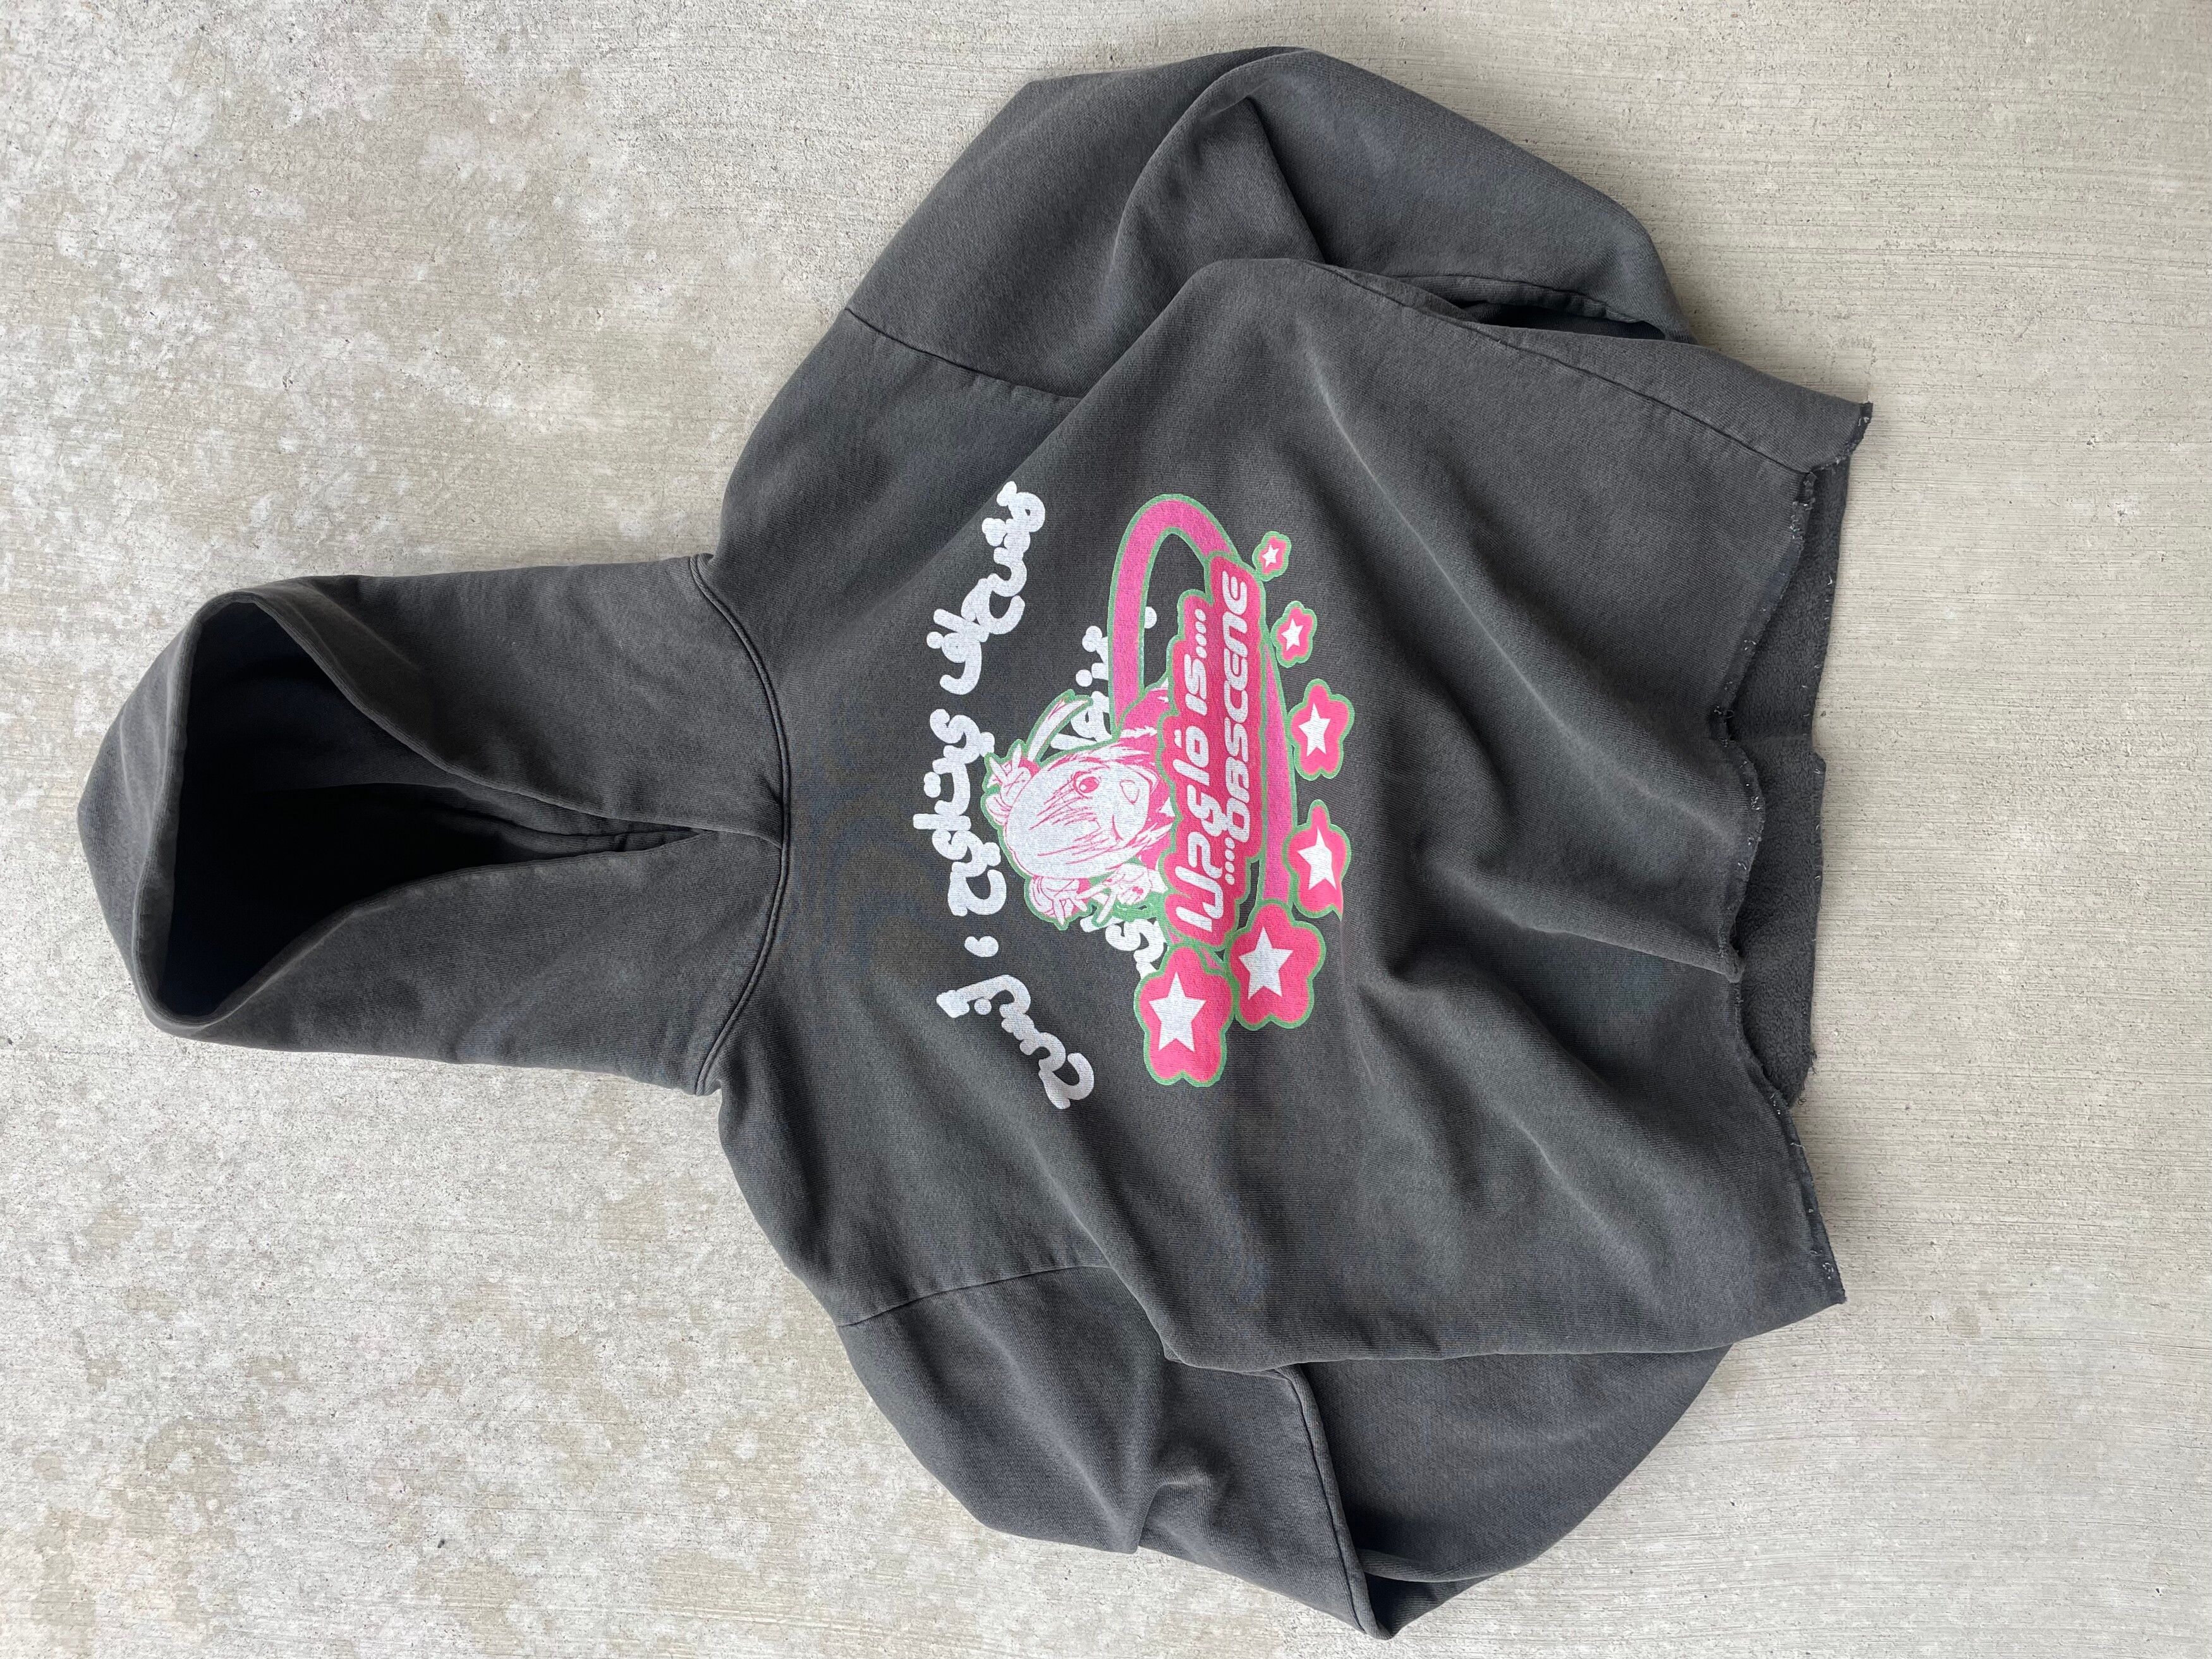 1 Of 1 Obscene hoodie first edition Size US M / EU 48-50 / 2 - 1 Preview